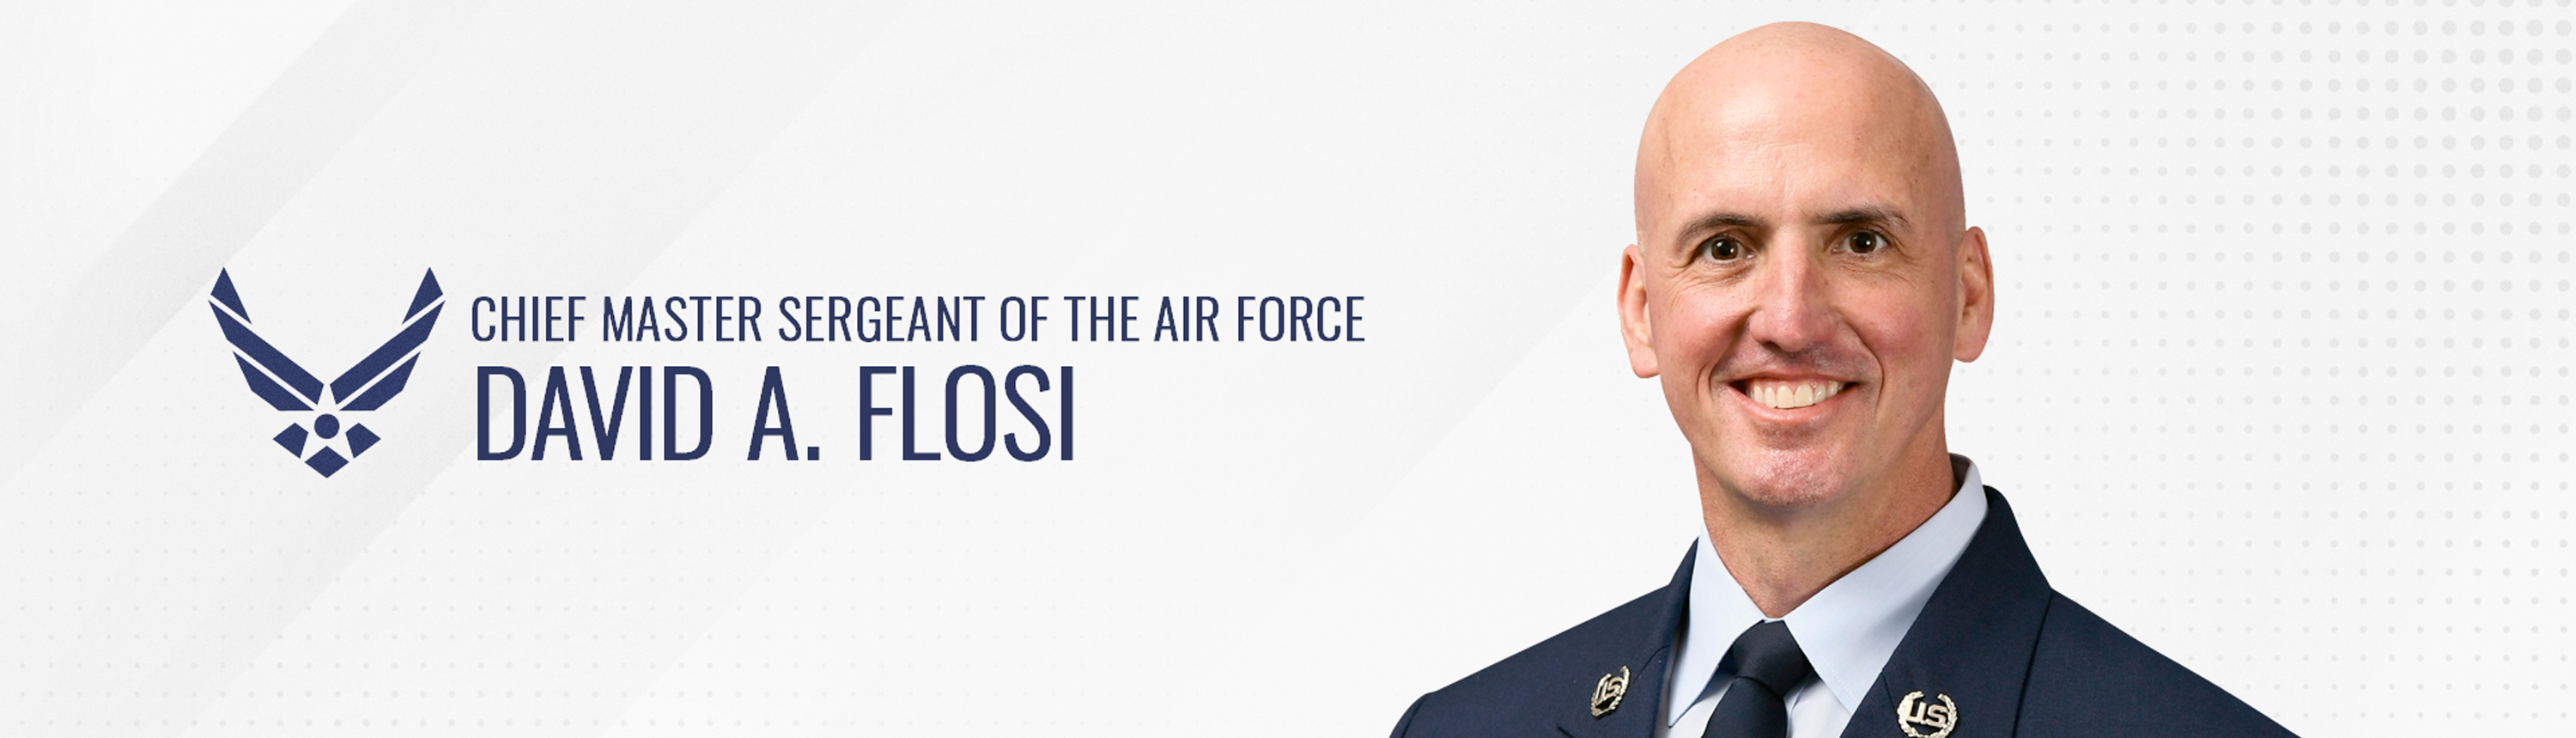 Chief Master Sergeant of the Air Force Sgt. David A. Flosi